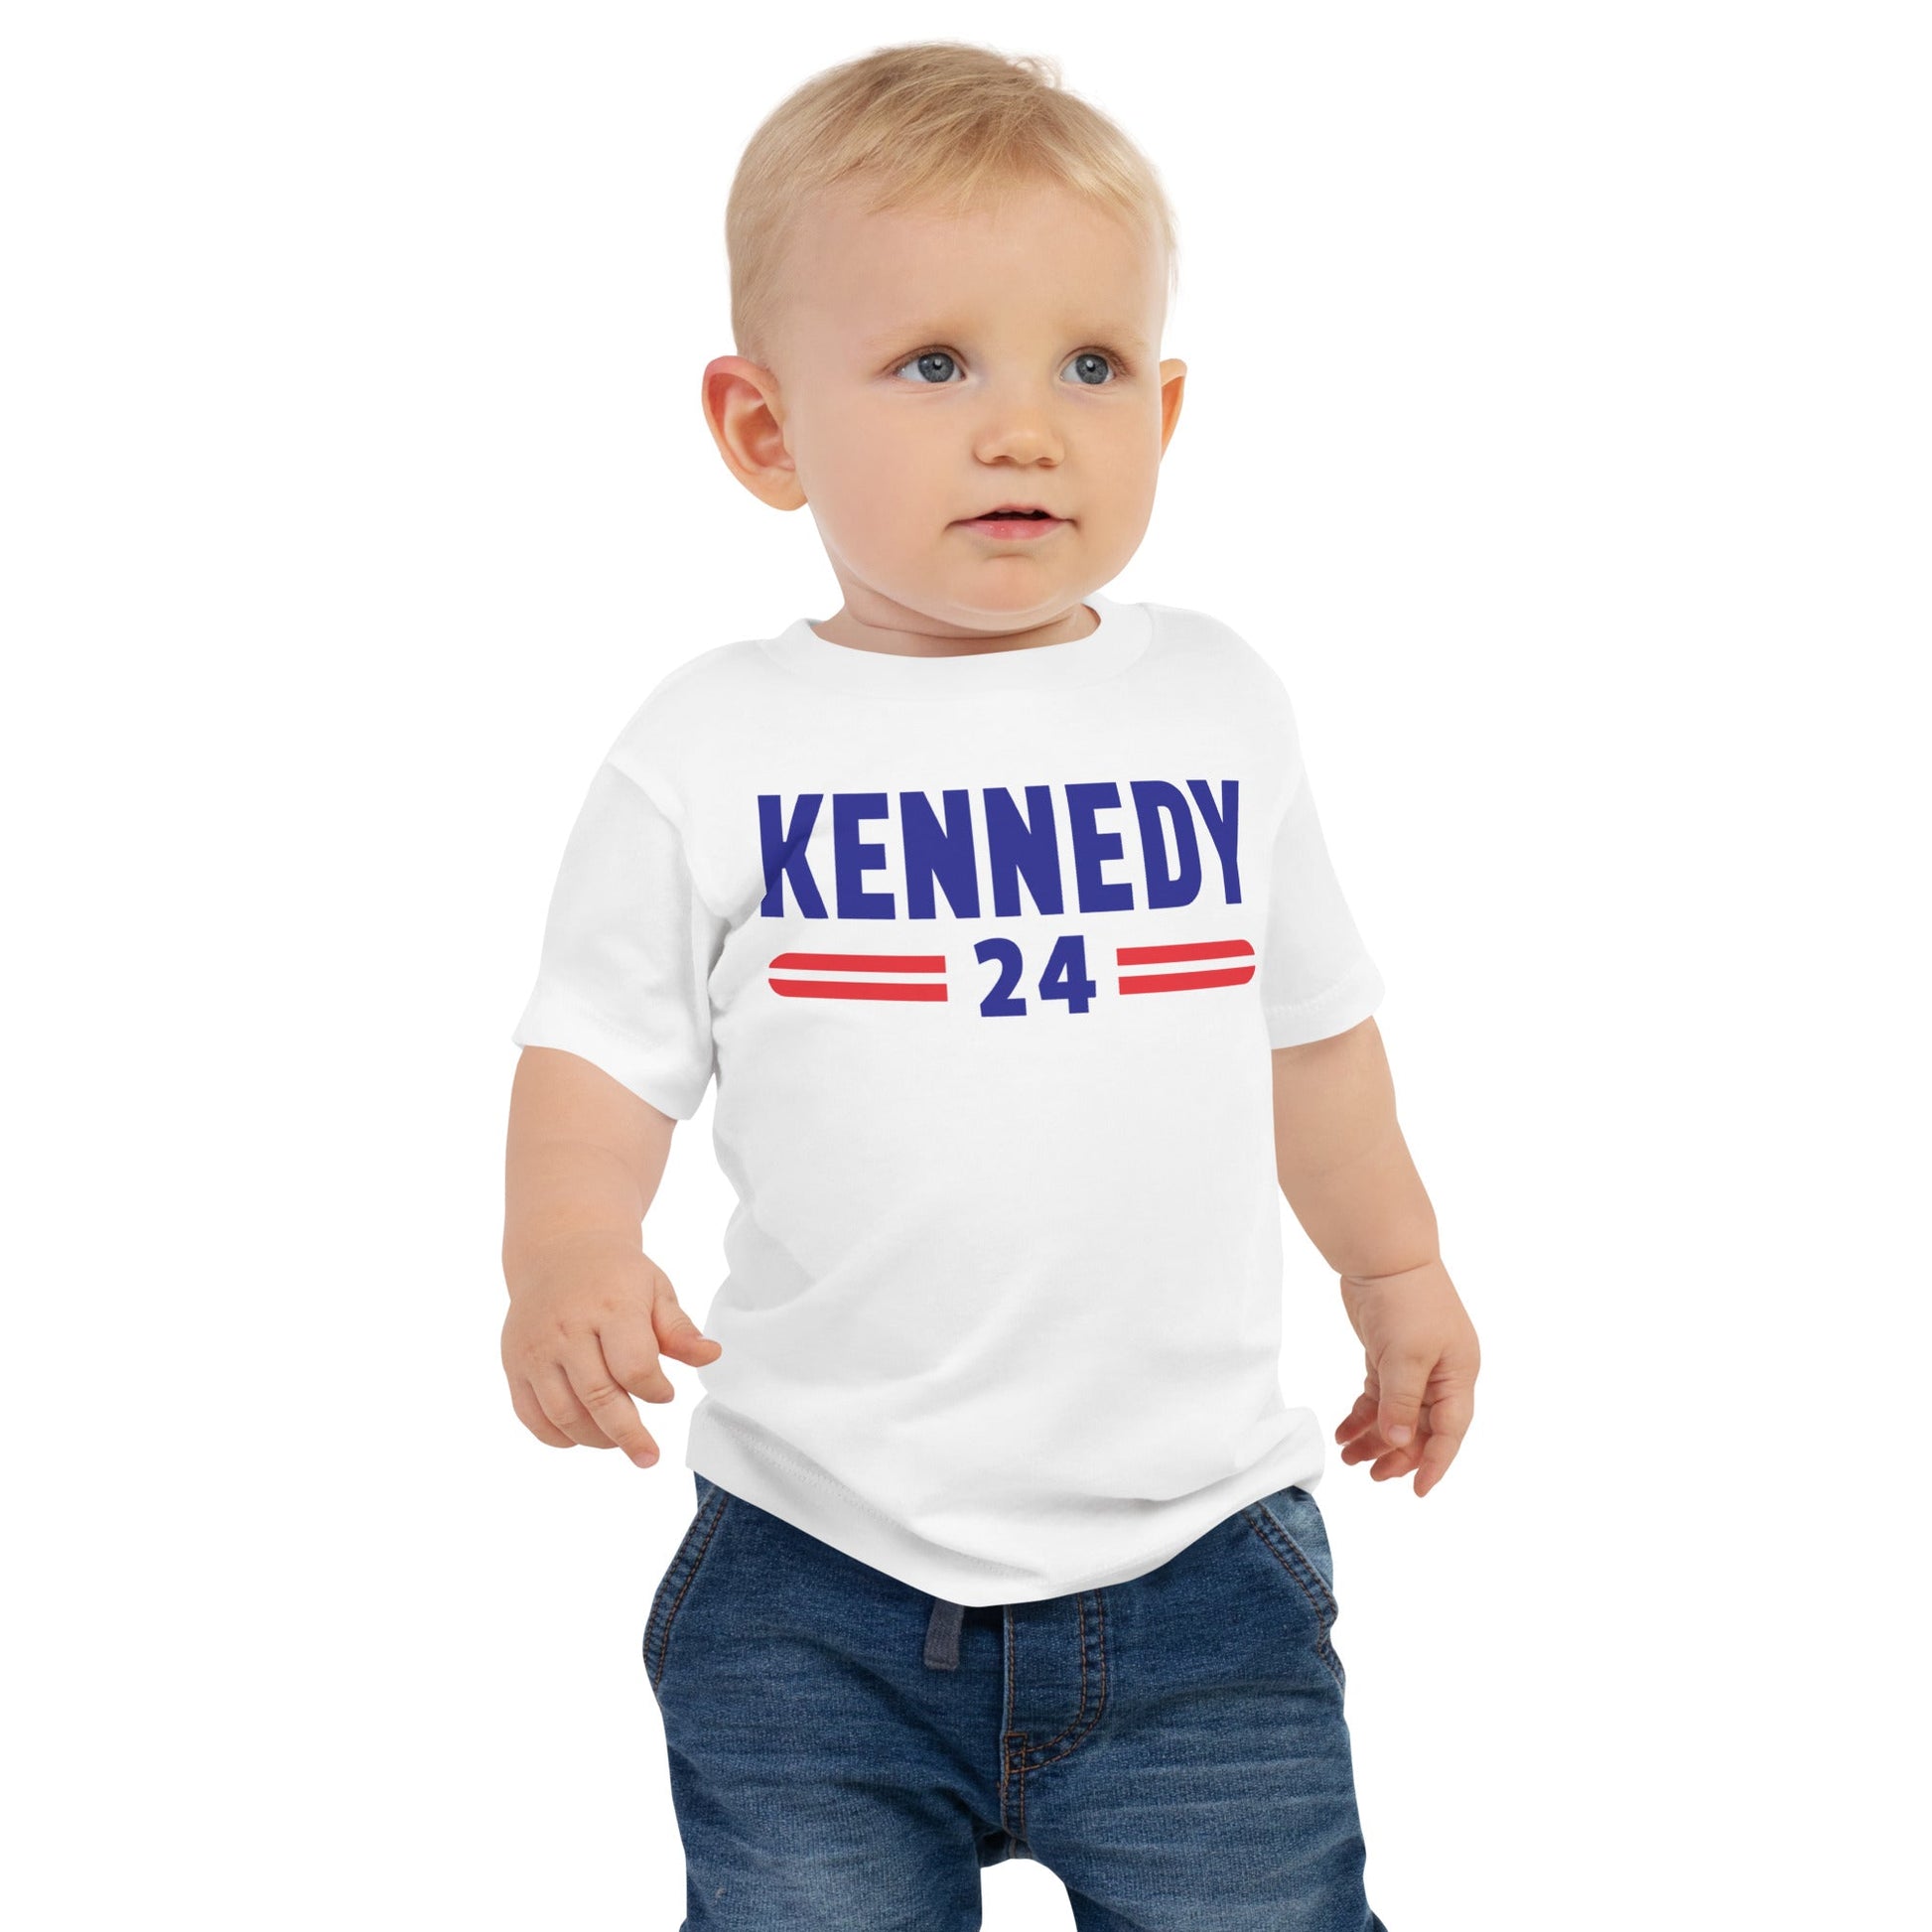 Kennedy Classic Baby Tee - TEAM KENNEDY. All rights reserved